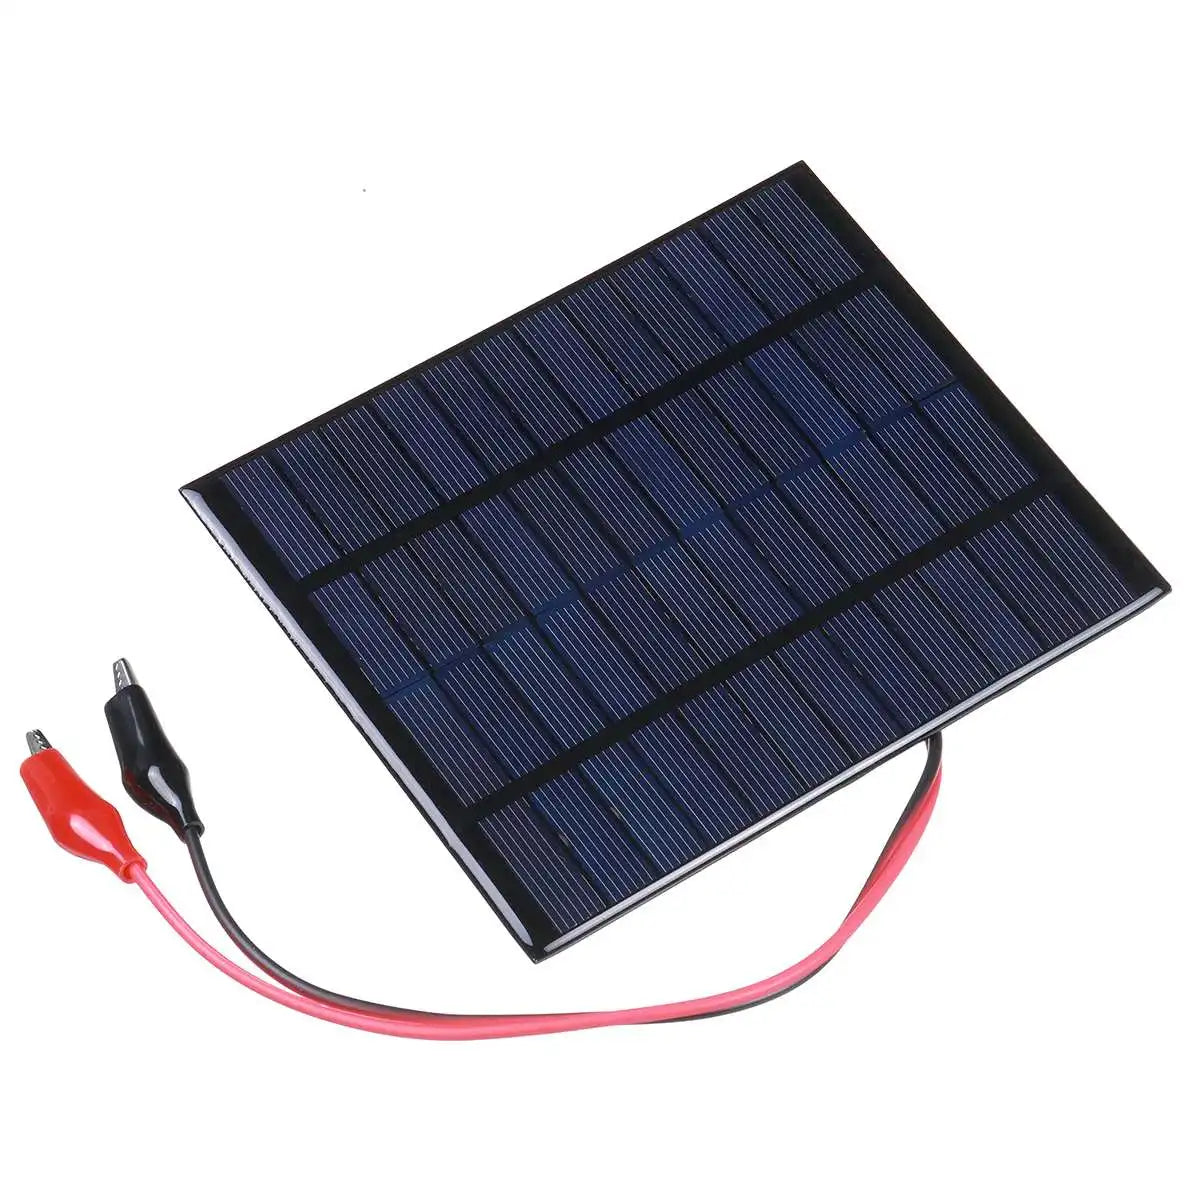 20W Solar Panel, Water-resistant and durable polycrystalline silicon ensures long-lasting performance and a lengthy lifespan.